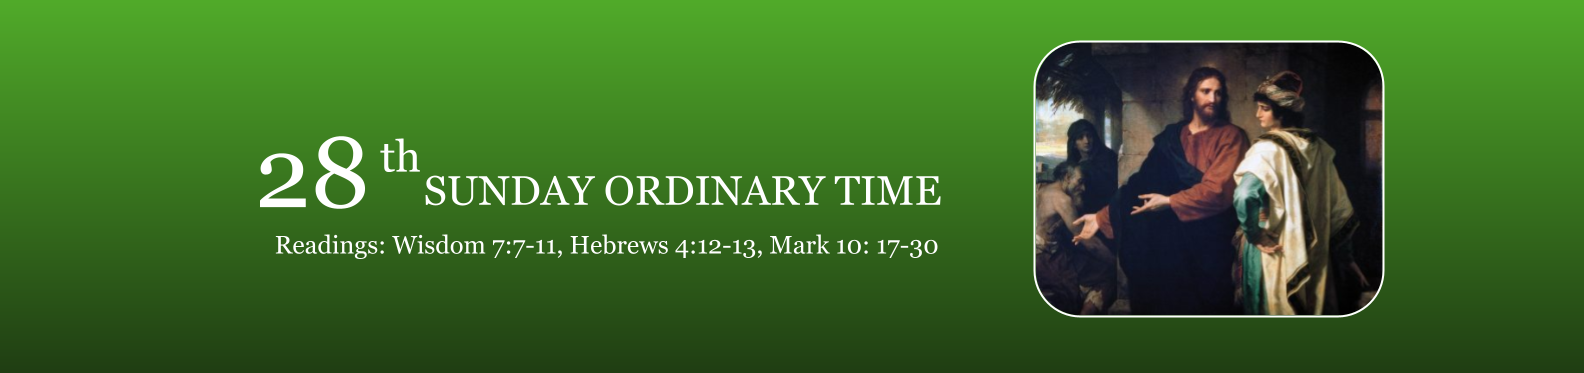 28th Sunday Ordinary Time  October 10, 2021